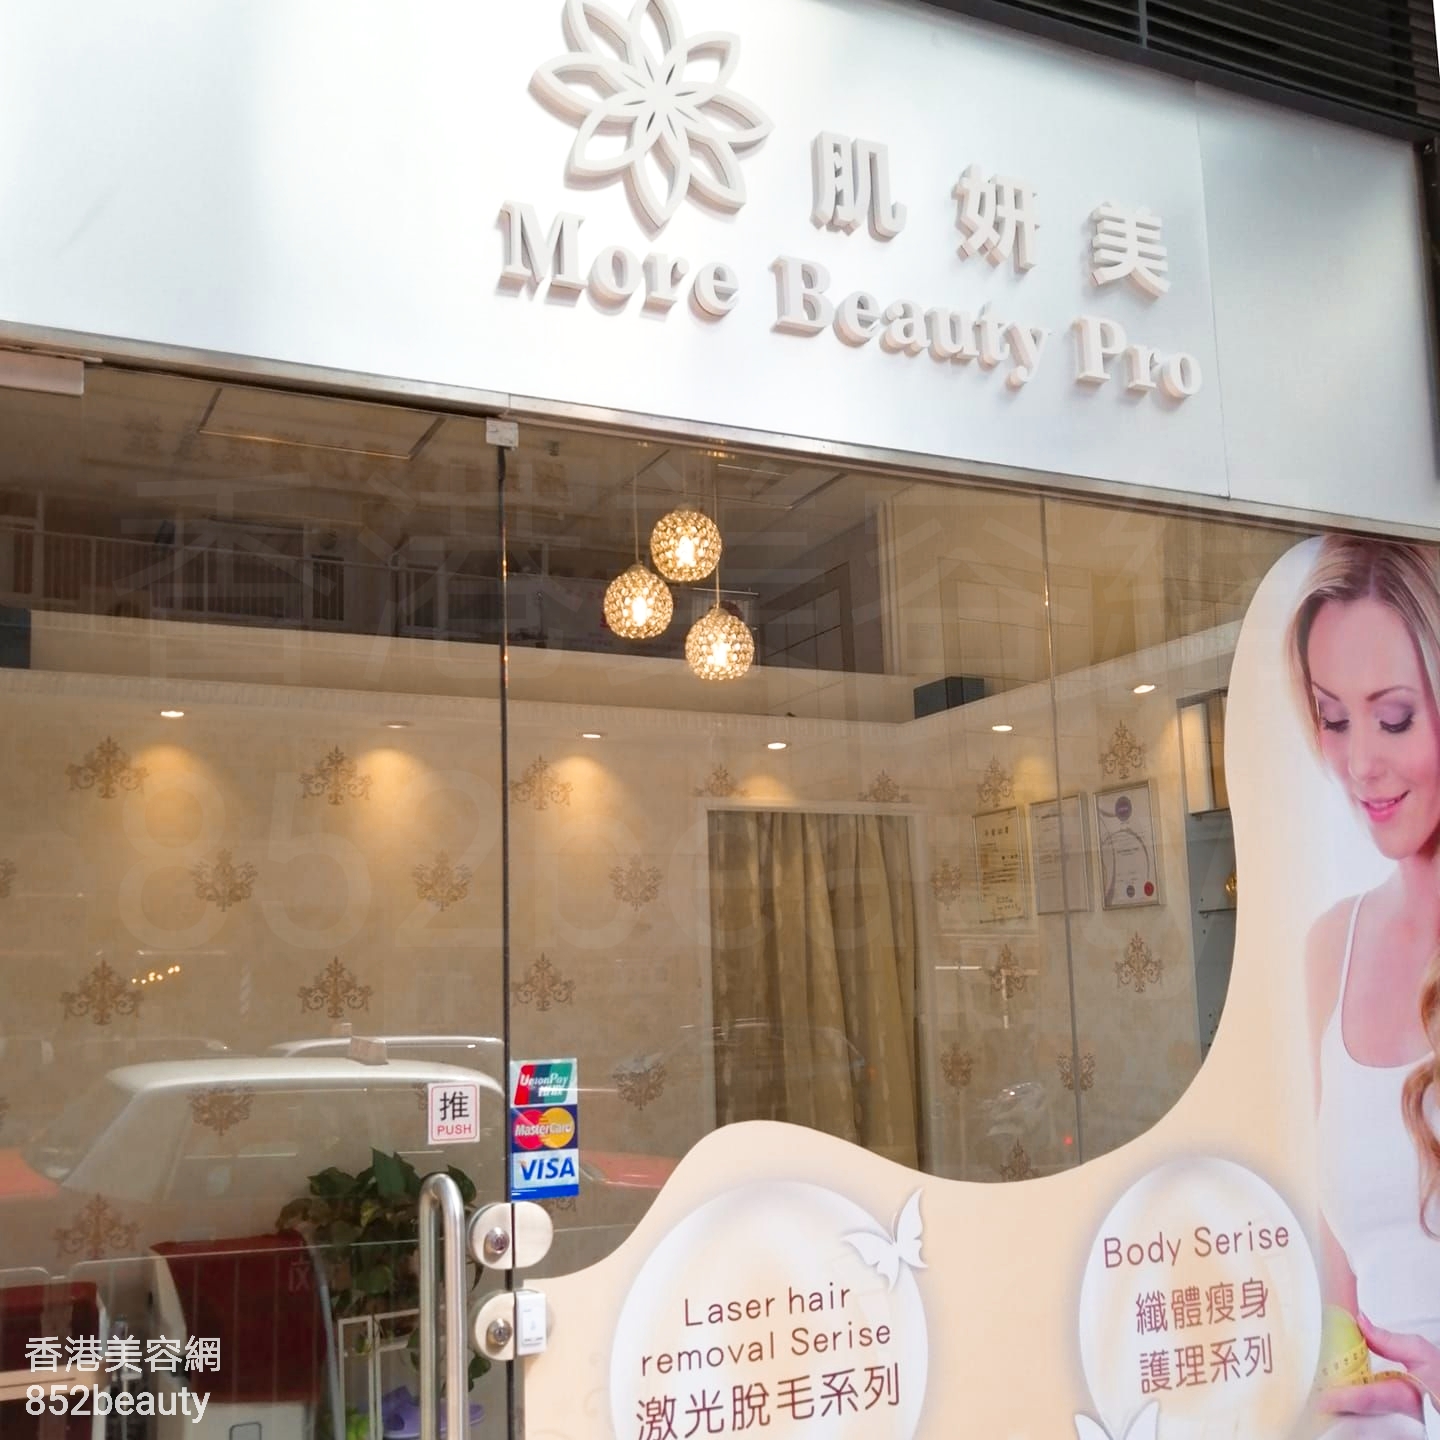 Hand and foot care: More Beauty Pro肌妍美（長沙灣店）